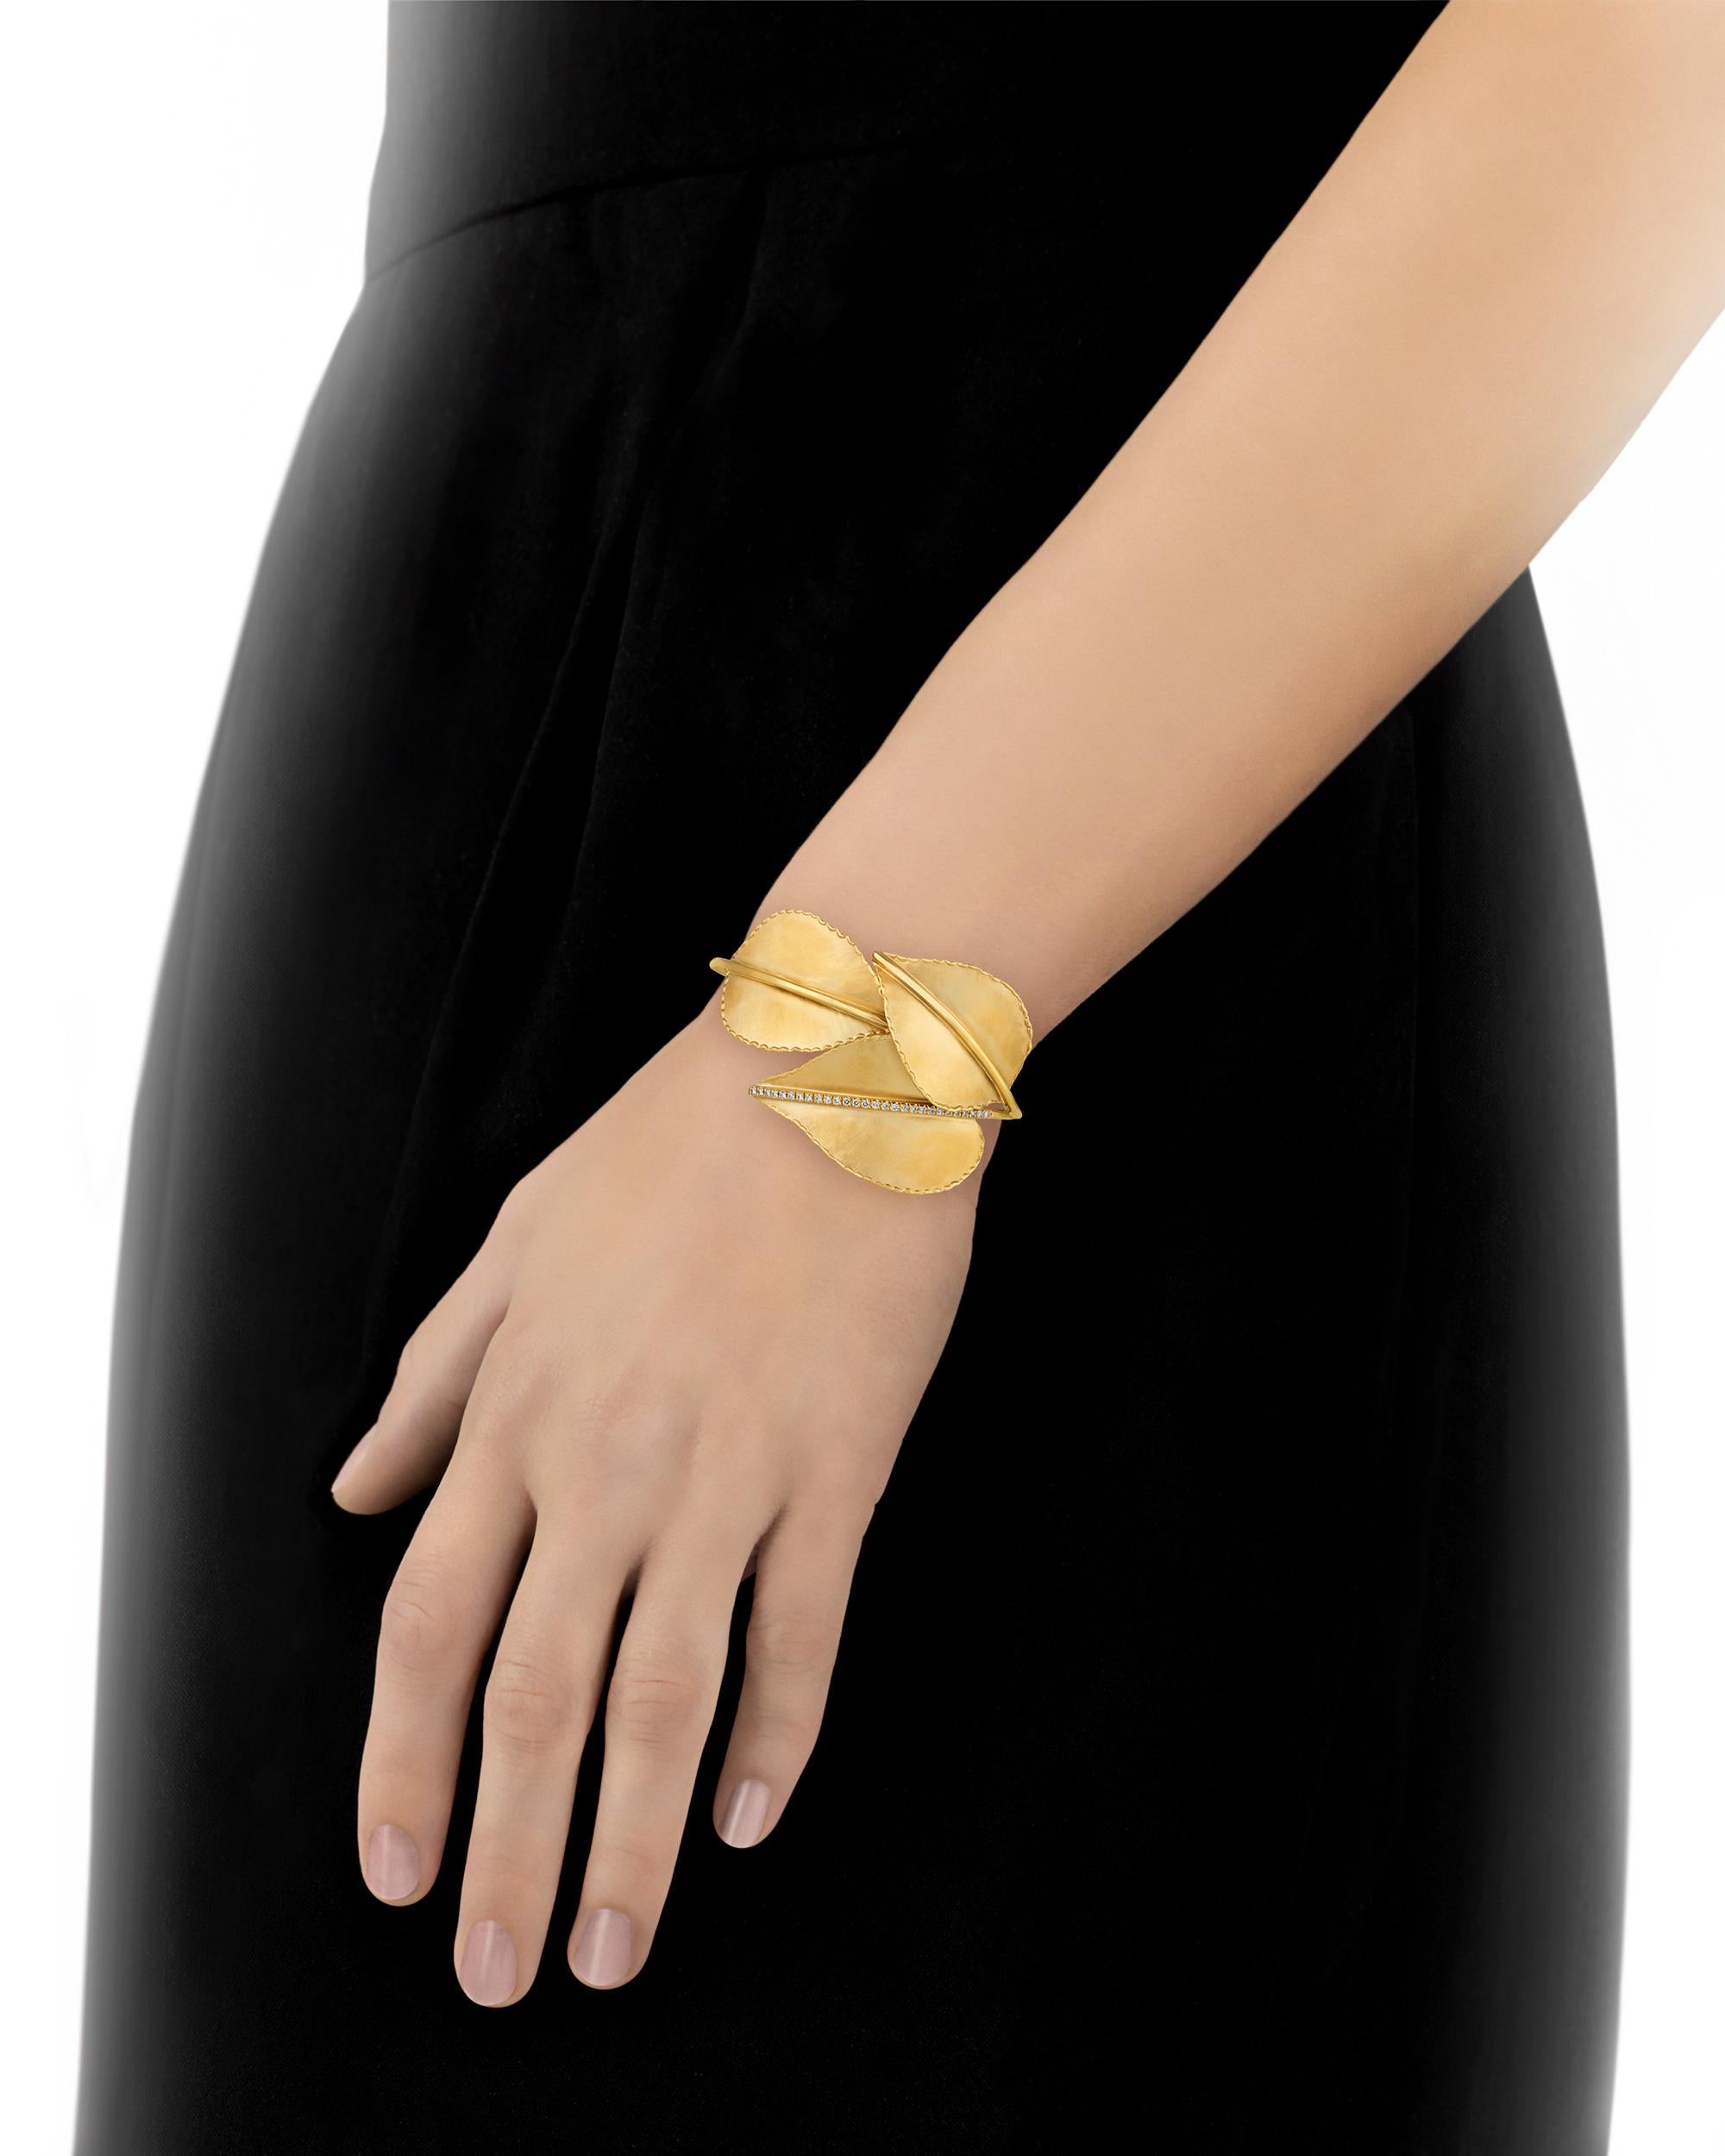 This elegant and charming bracelet is composed of three beautiful golden leaves artfully arranged to form a bangle cuff. The lustrous 14K gold bangle is accented by sparkling white diamonds totaling 0.28 carat. The unique design exudes whimsy and